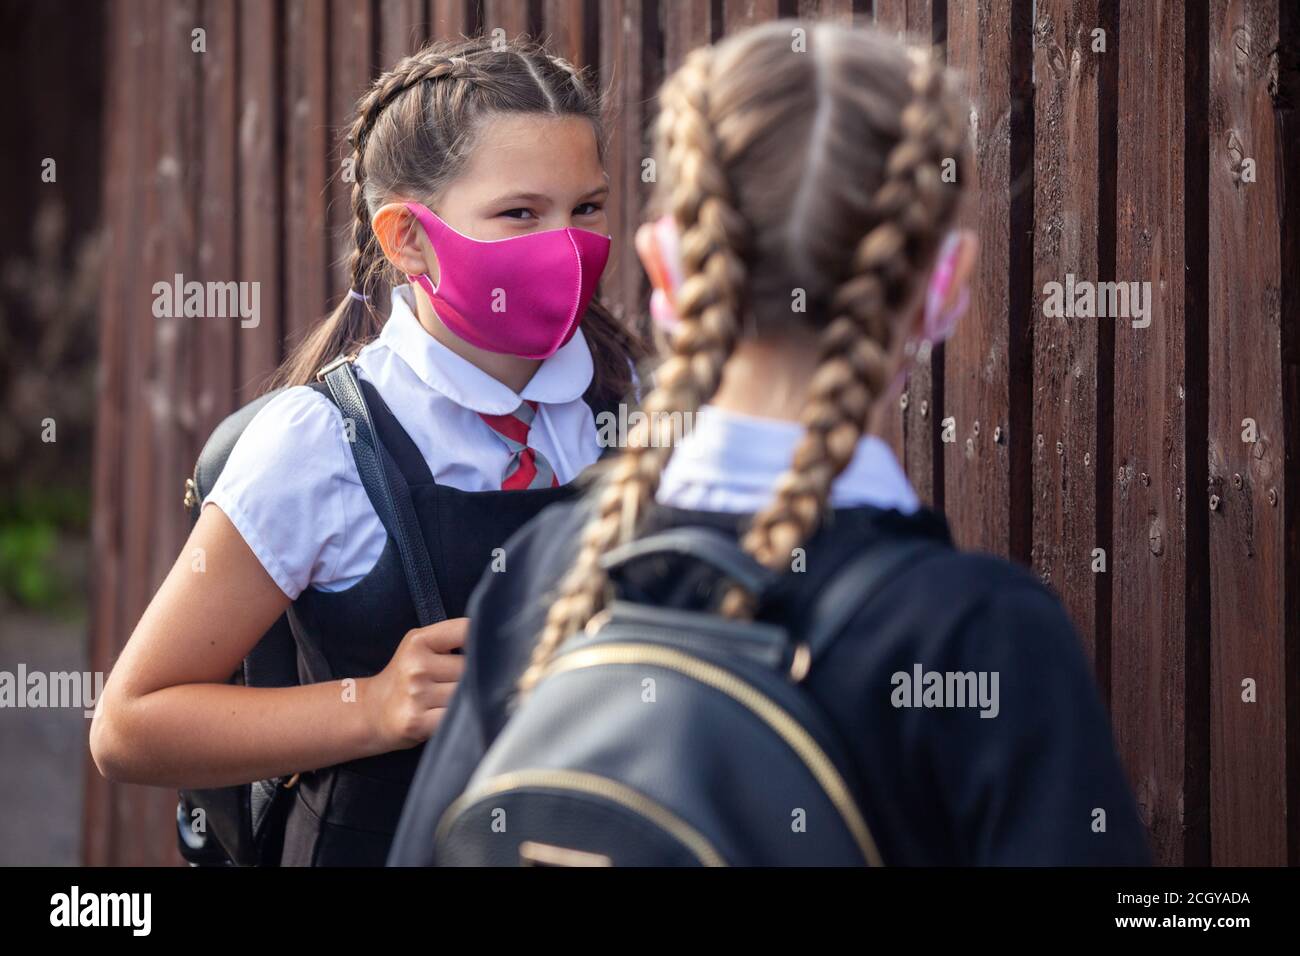 Two 10 year old school friends chatting to each other next to a wooden fence and wearing face masks. Stock Photo